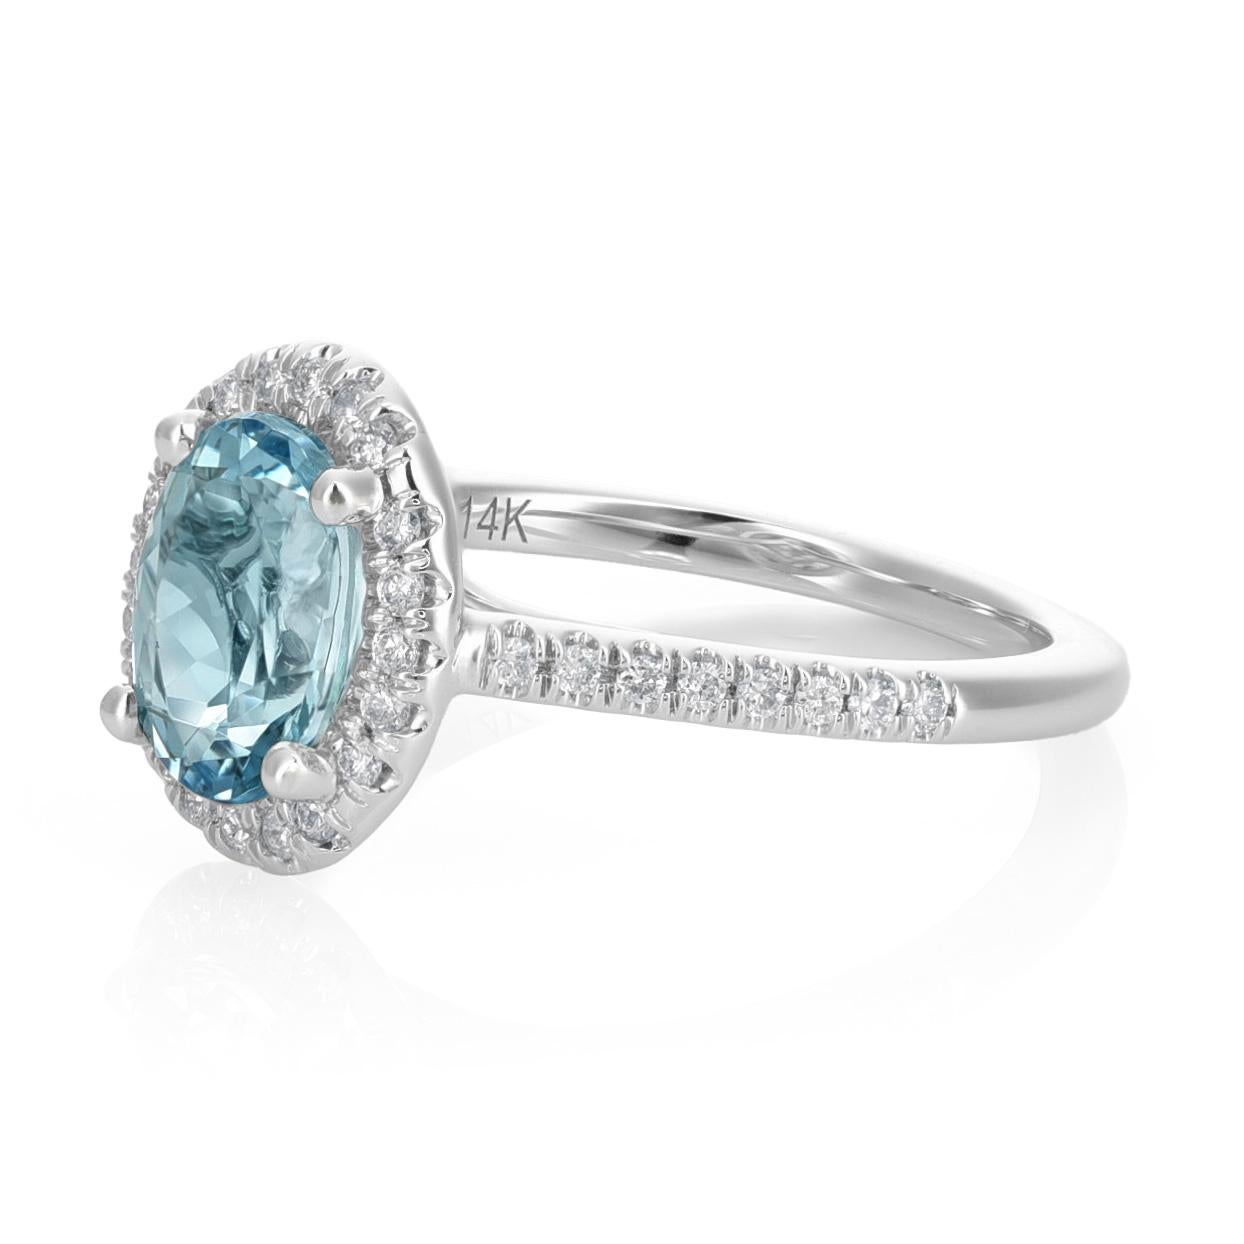 Delight in the allure of this 14K White gold ring featuring  0.61 carats natural oval-cut aquamarine. The aquamarine's captivating hue is heightened through a careful heating process. Complementing the centerpiece, 0.17 carats of diamonds encircle